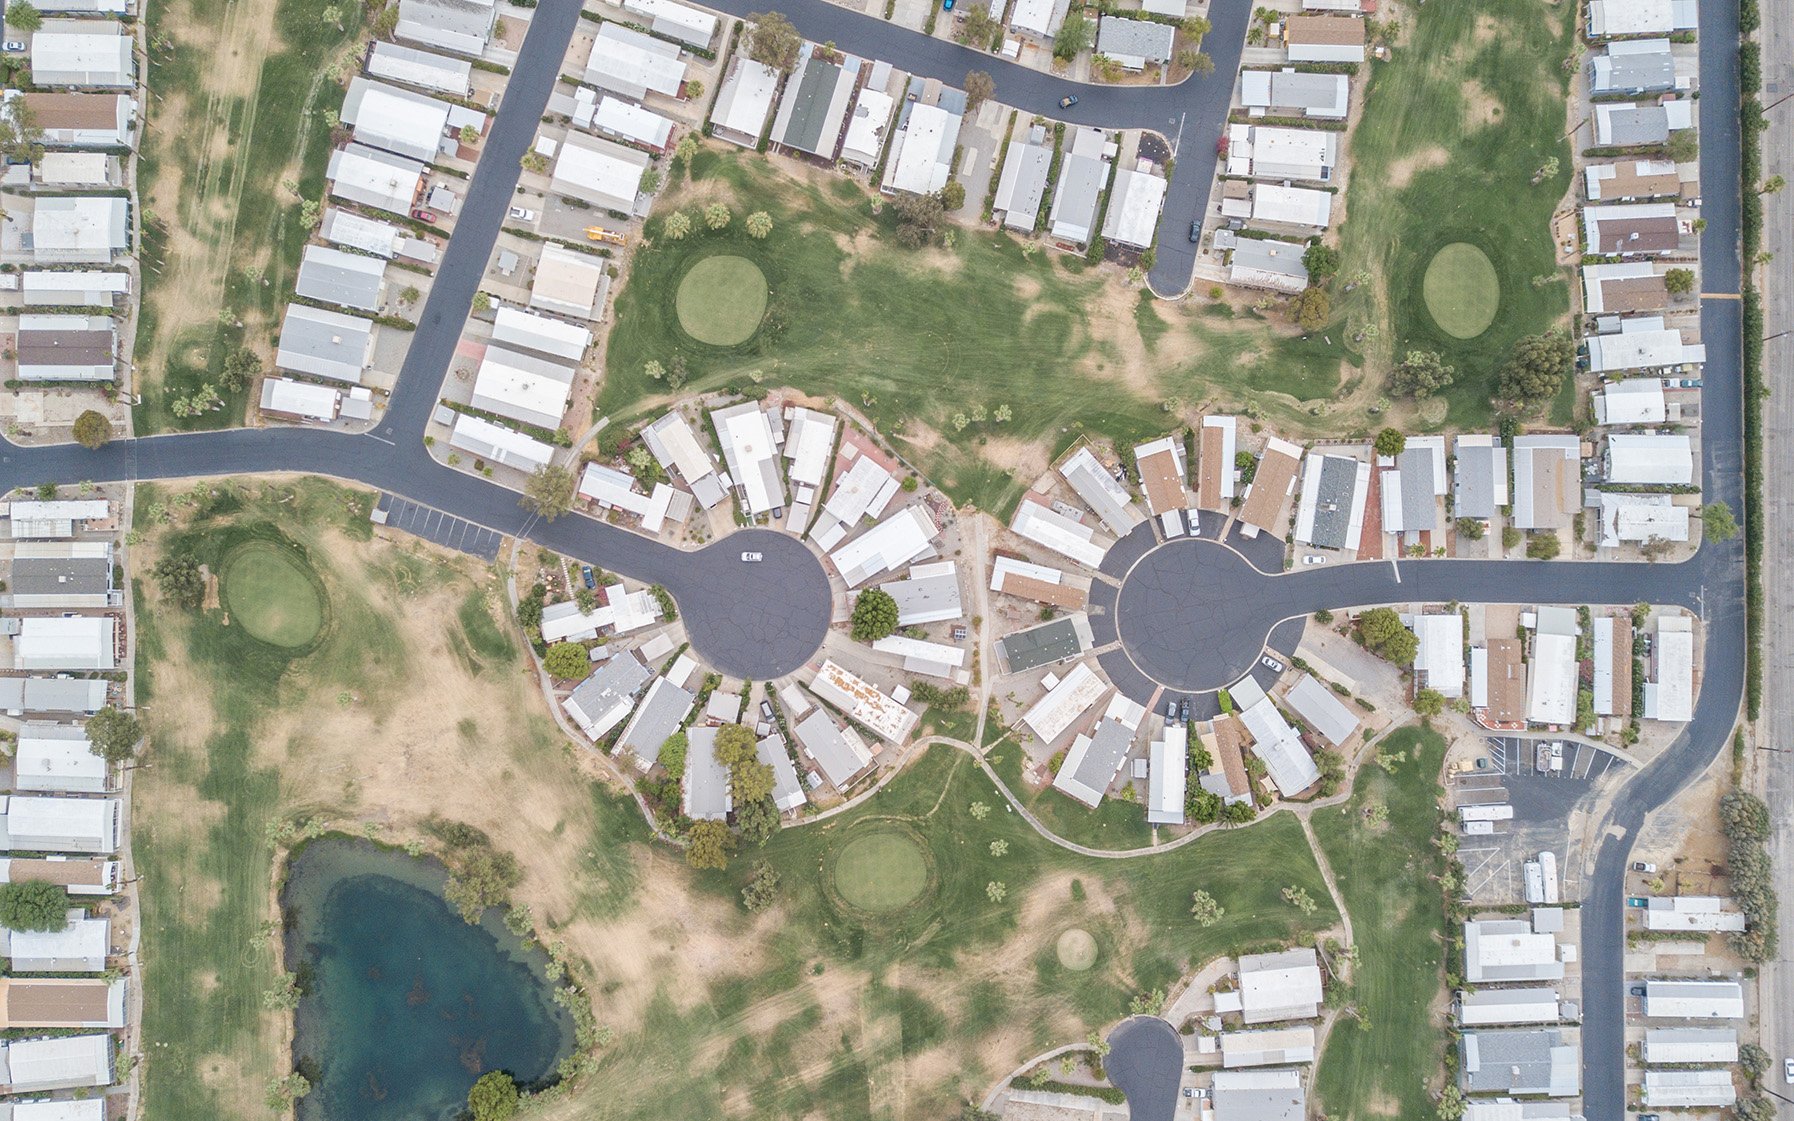 Hidden Springs Affordable Housing Community Aerial Shot of Manufactured Homes